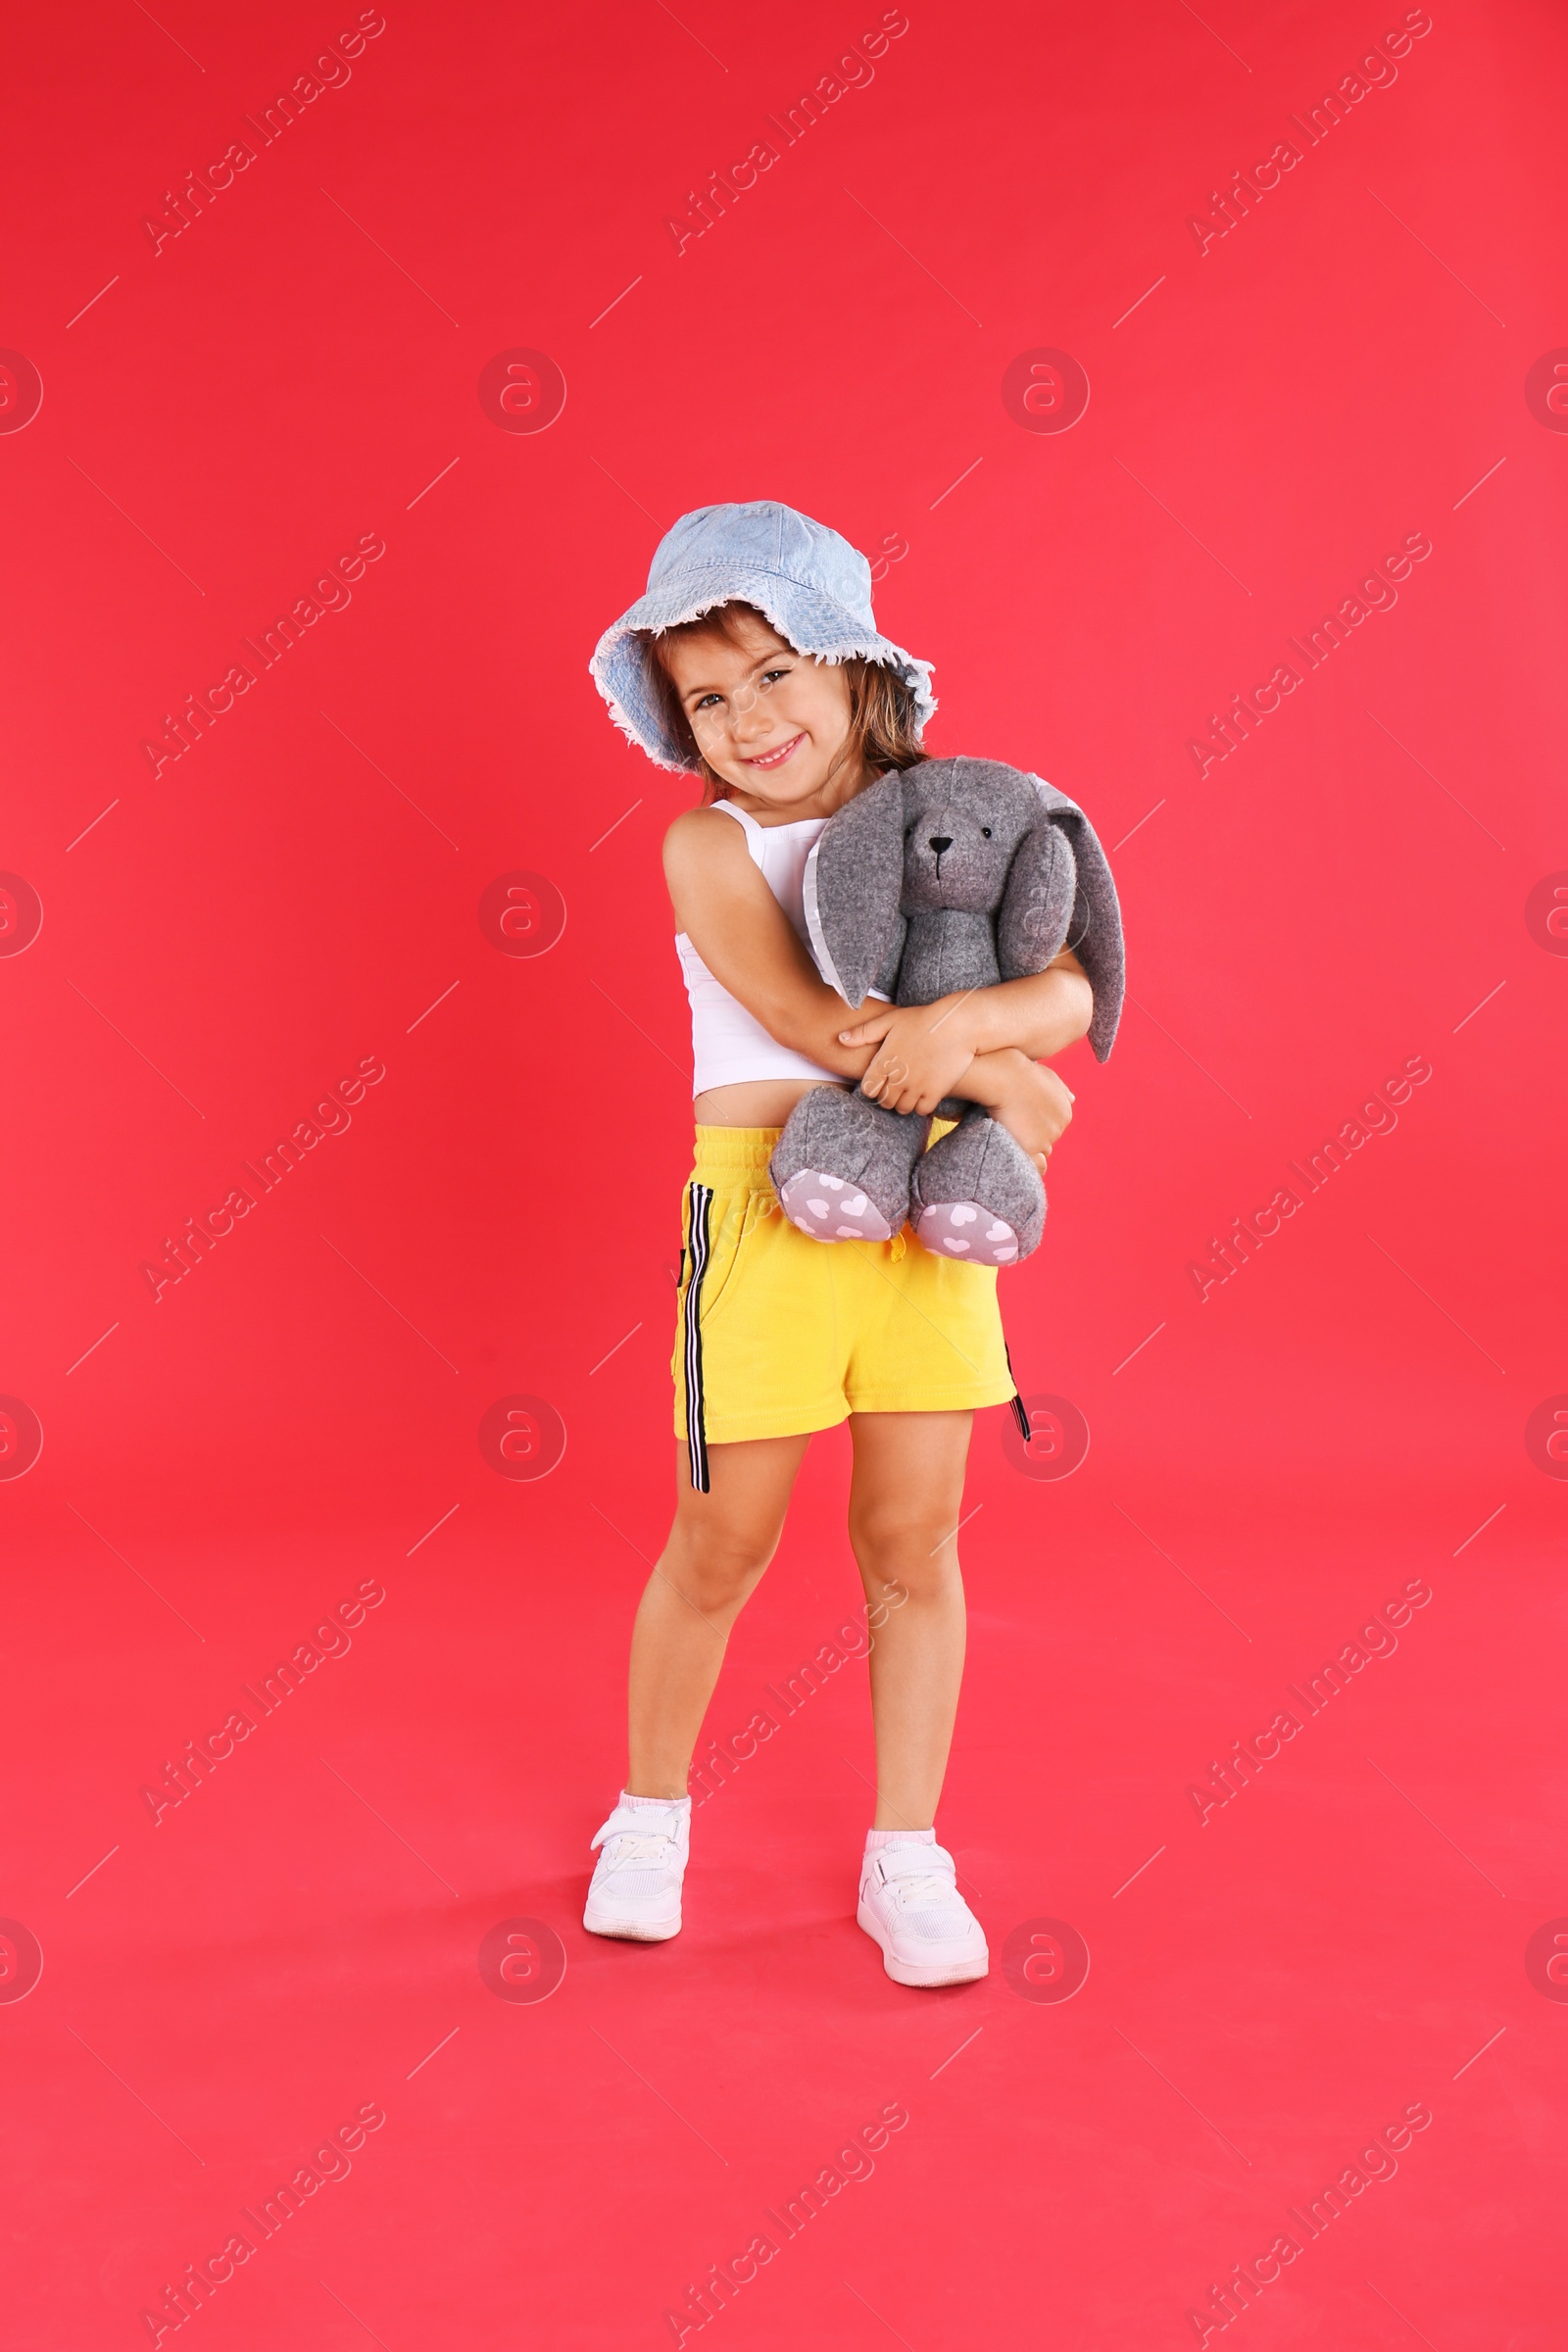 Photo of Cute little girl with toy rabbit on red background